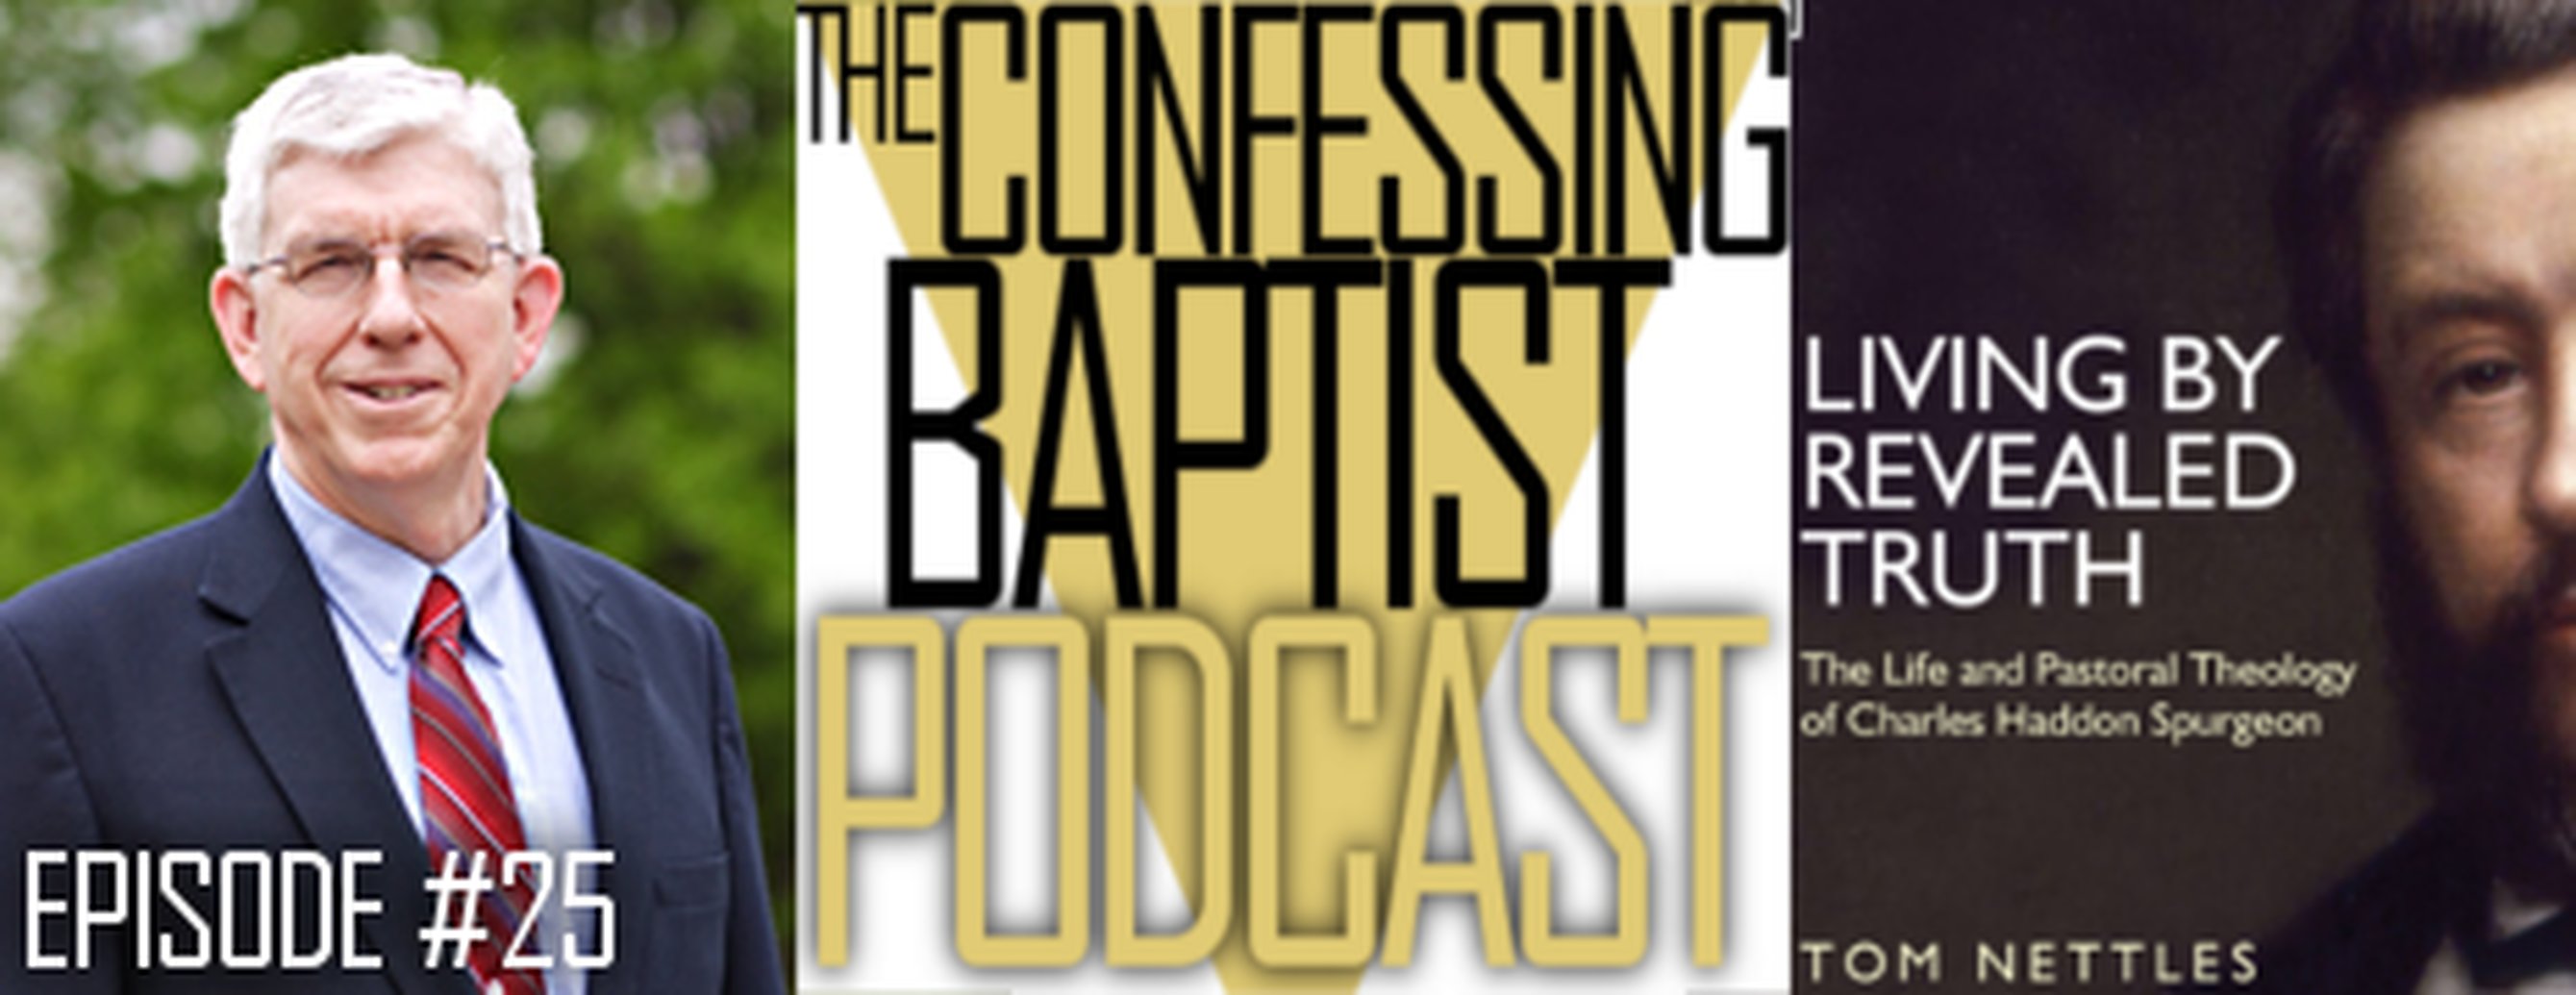 Tom Nettles Interviewed on The Confessing Baptist Podcast